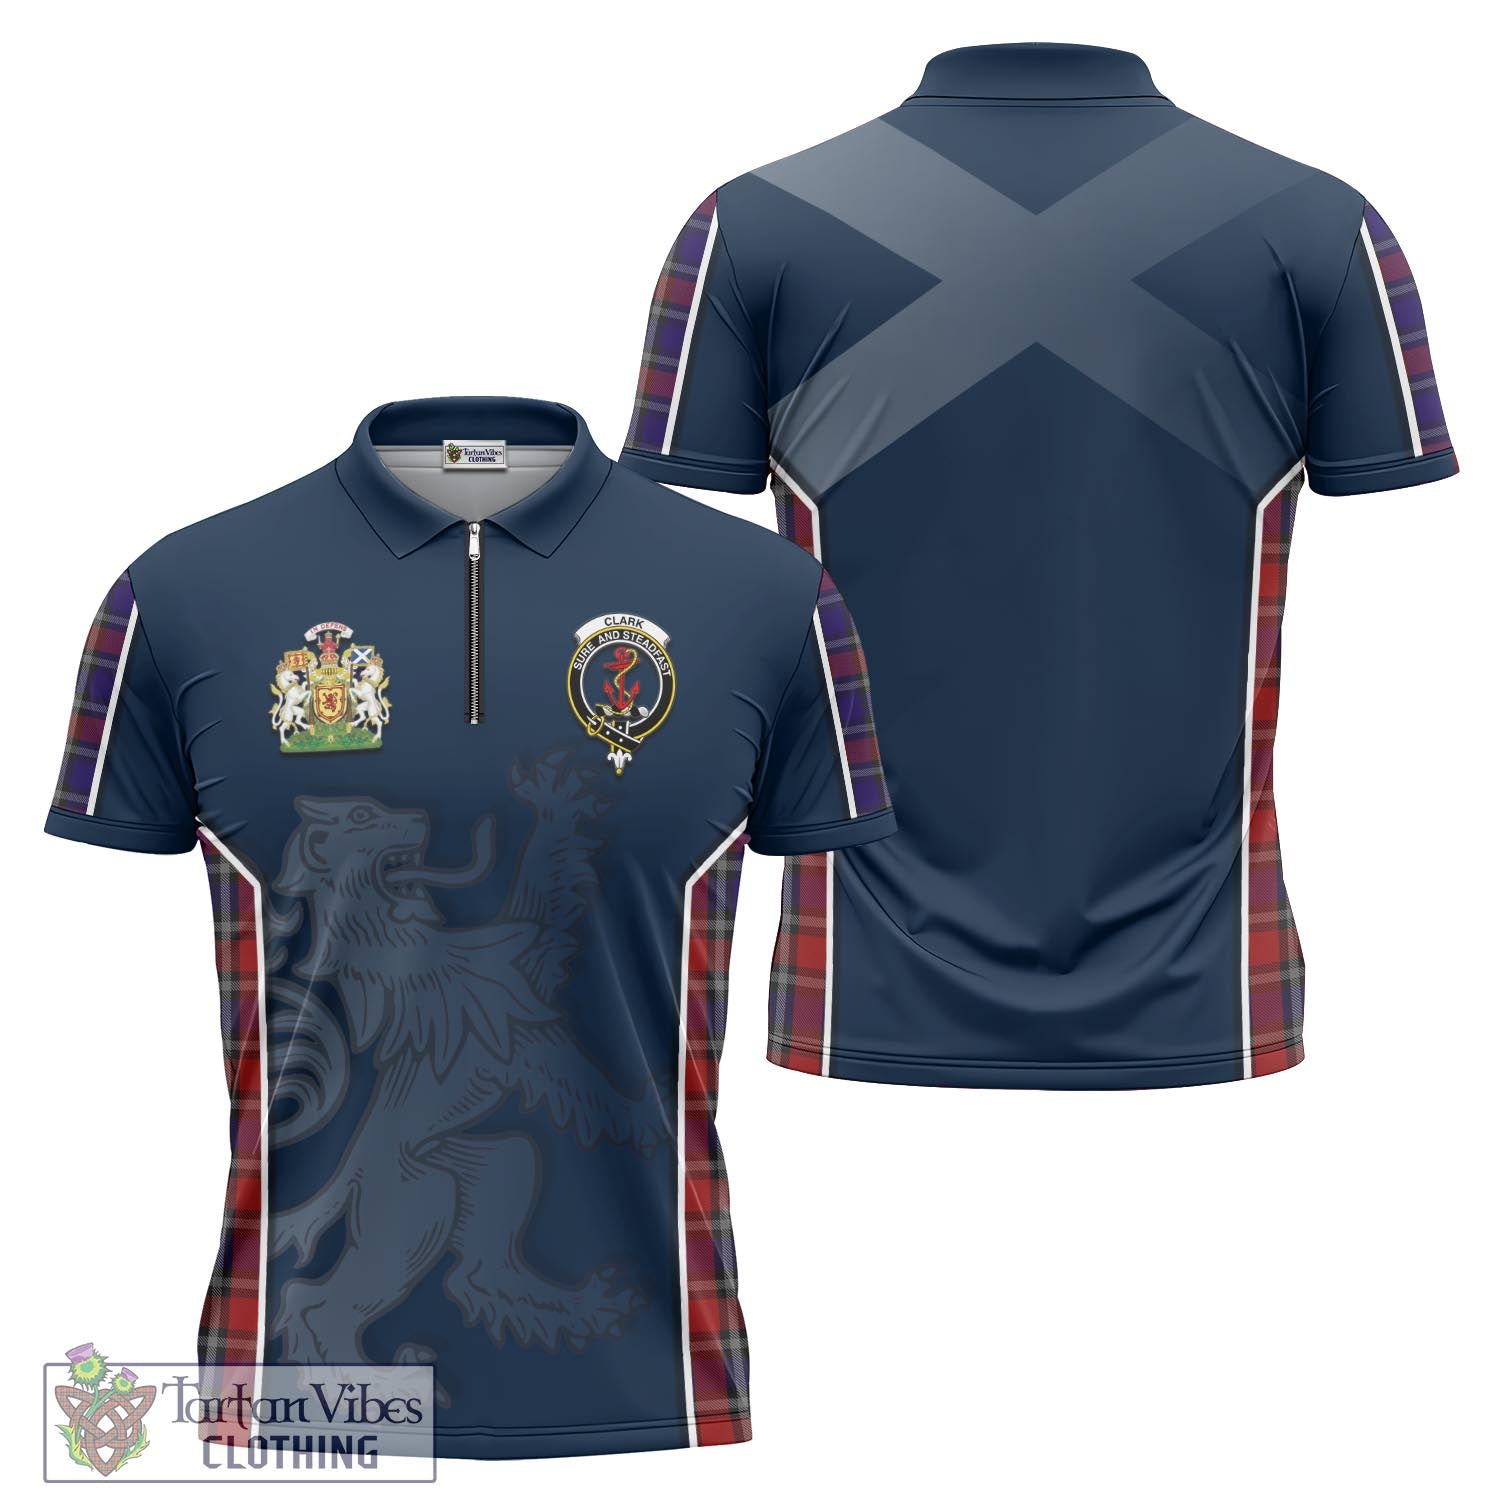 Tartan Vibes Clothing Clark Red Tartan Zipper Polo Shirt with Family Crest and Lion Rampant Vibes Sport Style